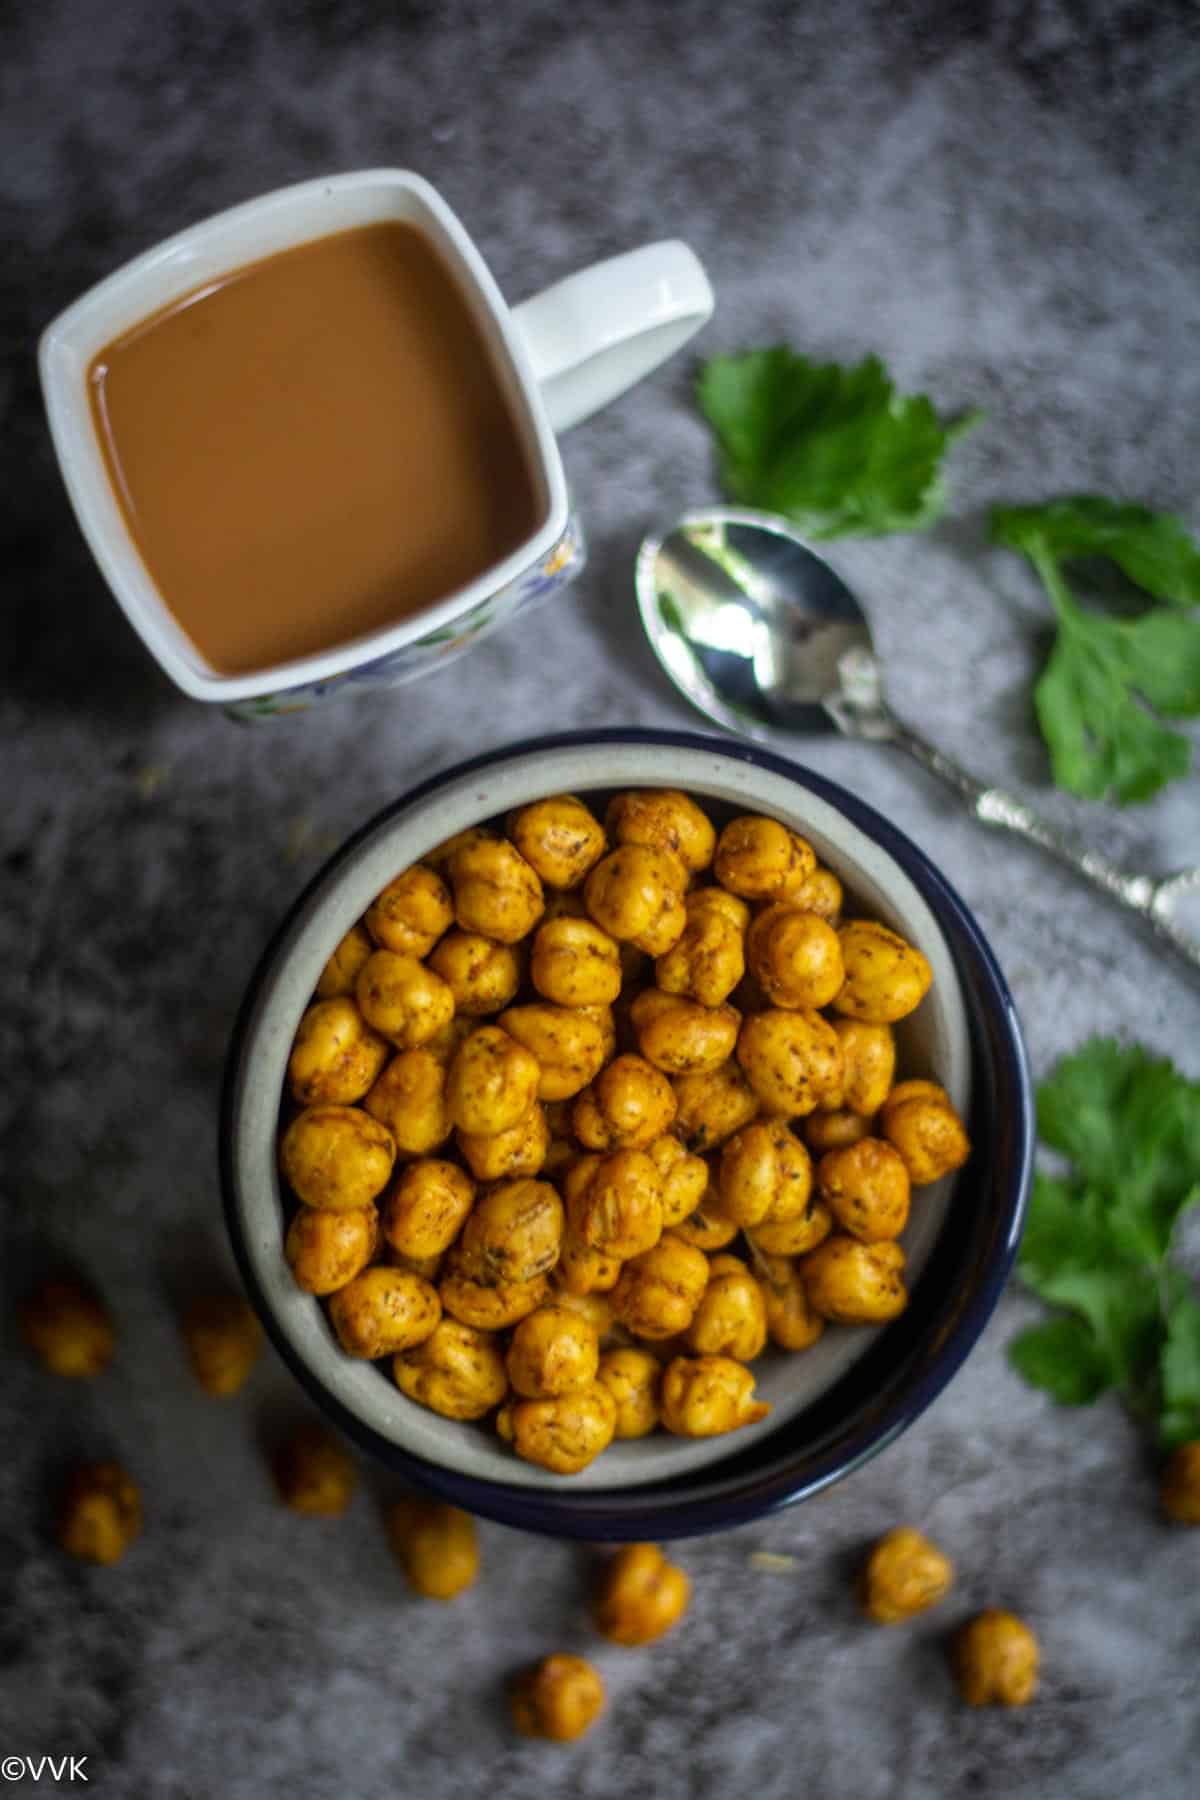 flowing shot of roasted chickpeas and few scattered below served with tea